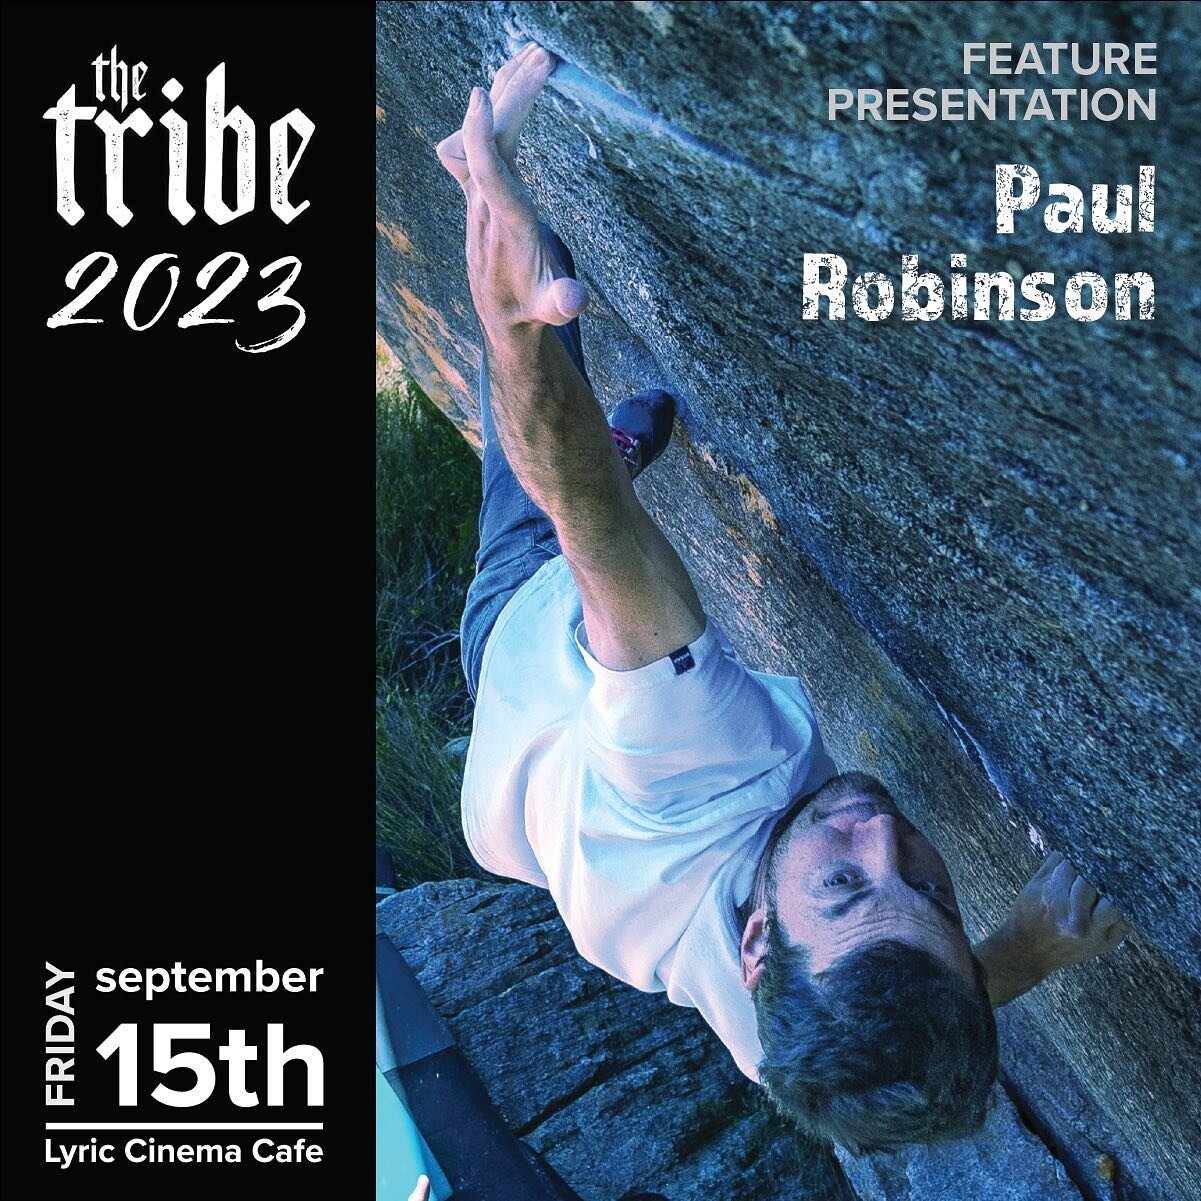 Very pleased about this all star lineup of presenters! Whose psyched?!
.
@paulrobinson87 
.
@poudre_guide 
.
@woahclimbing